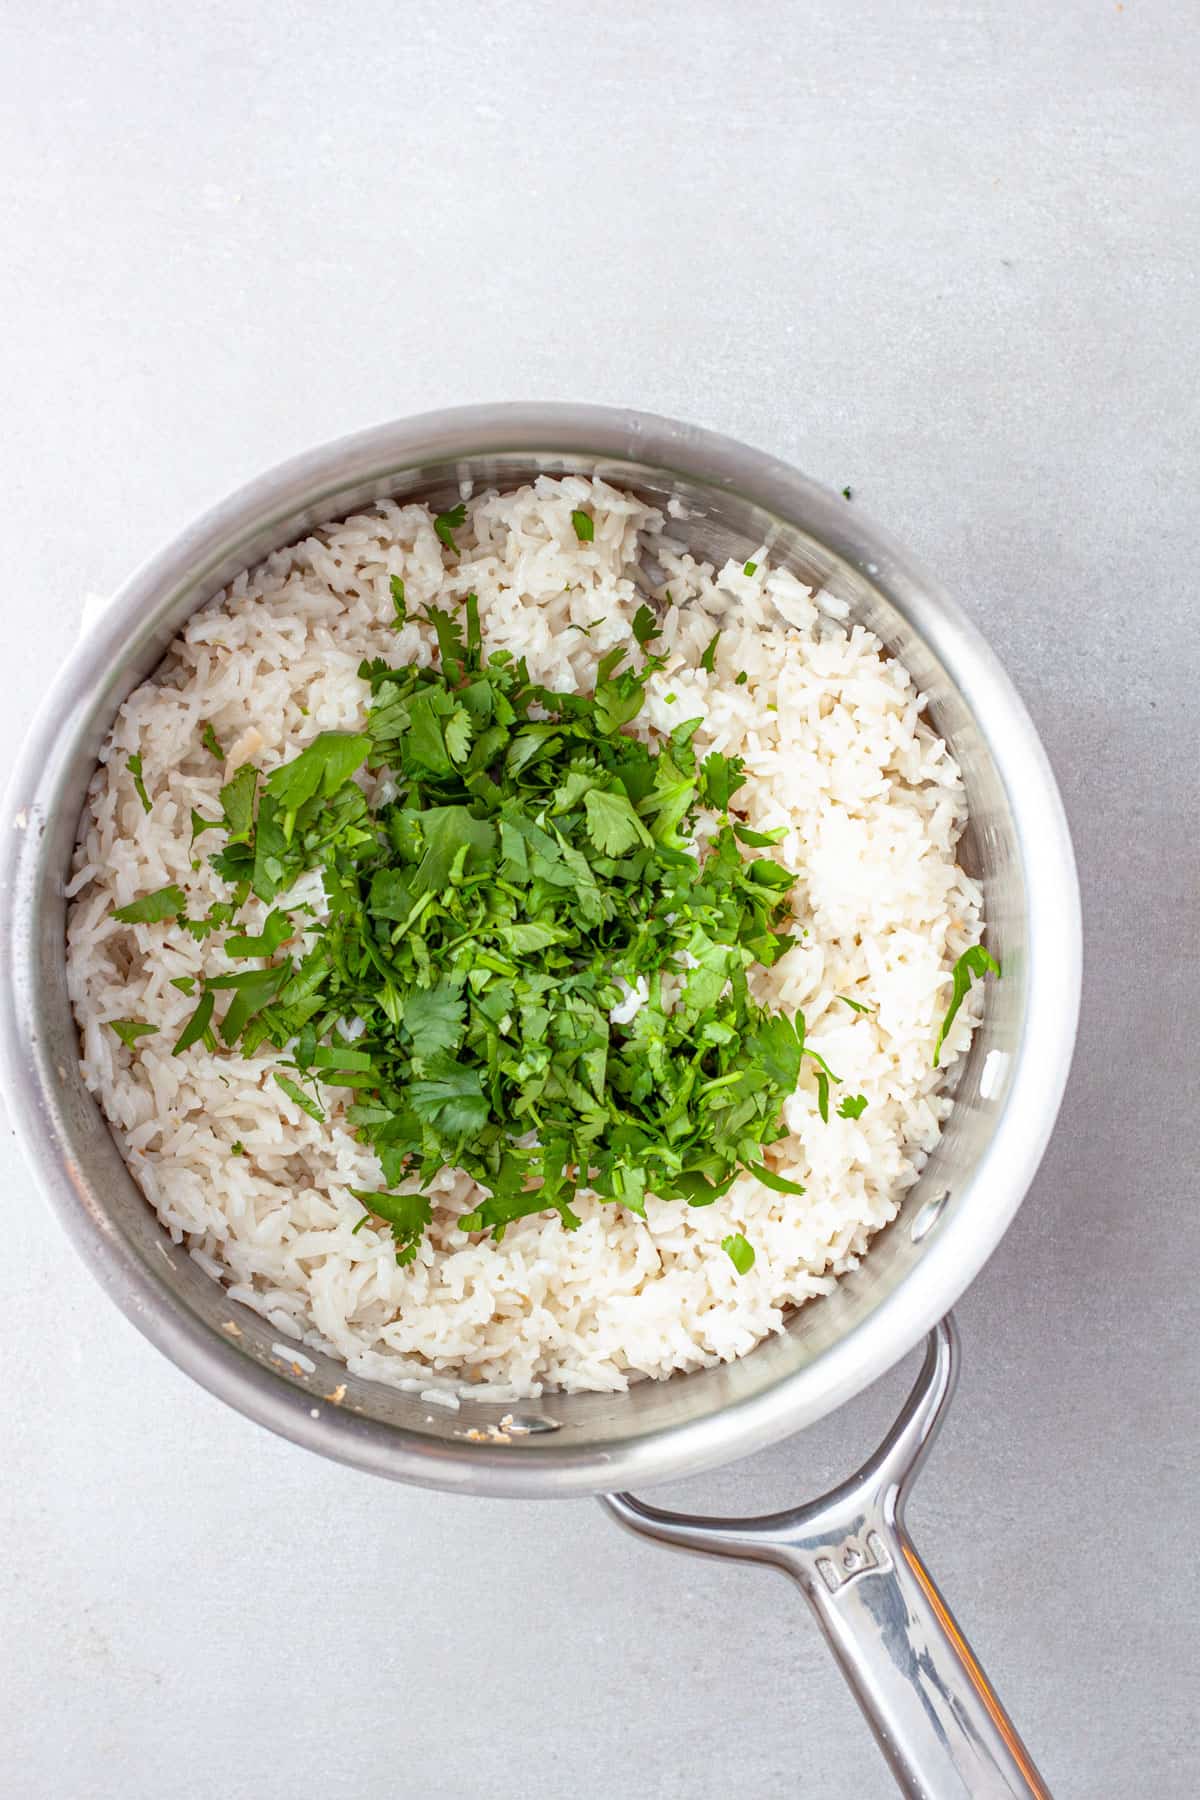 Chopped cilantro added to a saucepan with cooked coconut rice.